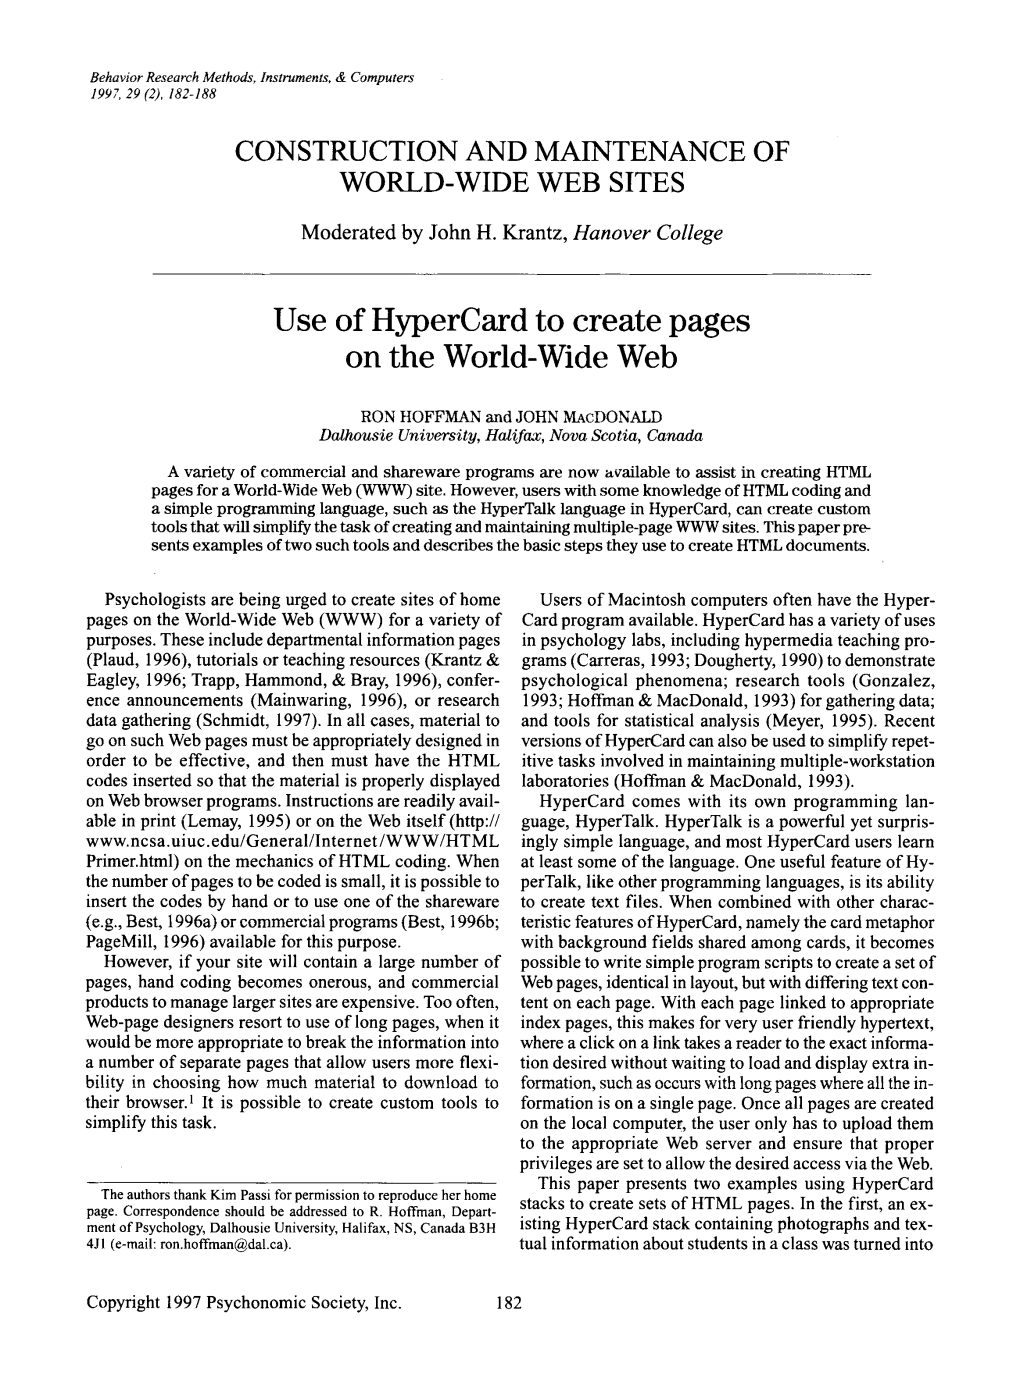 Use of Hypercard to Create Pages on the World-Wide